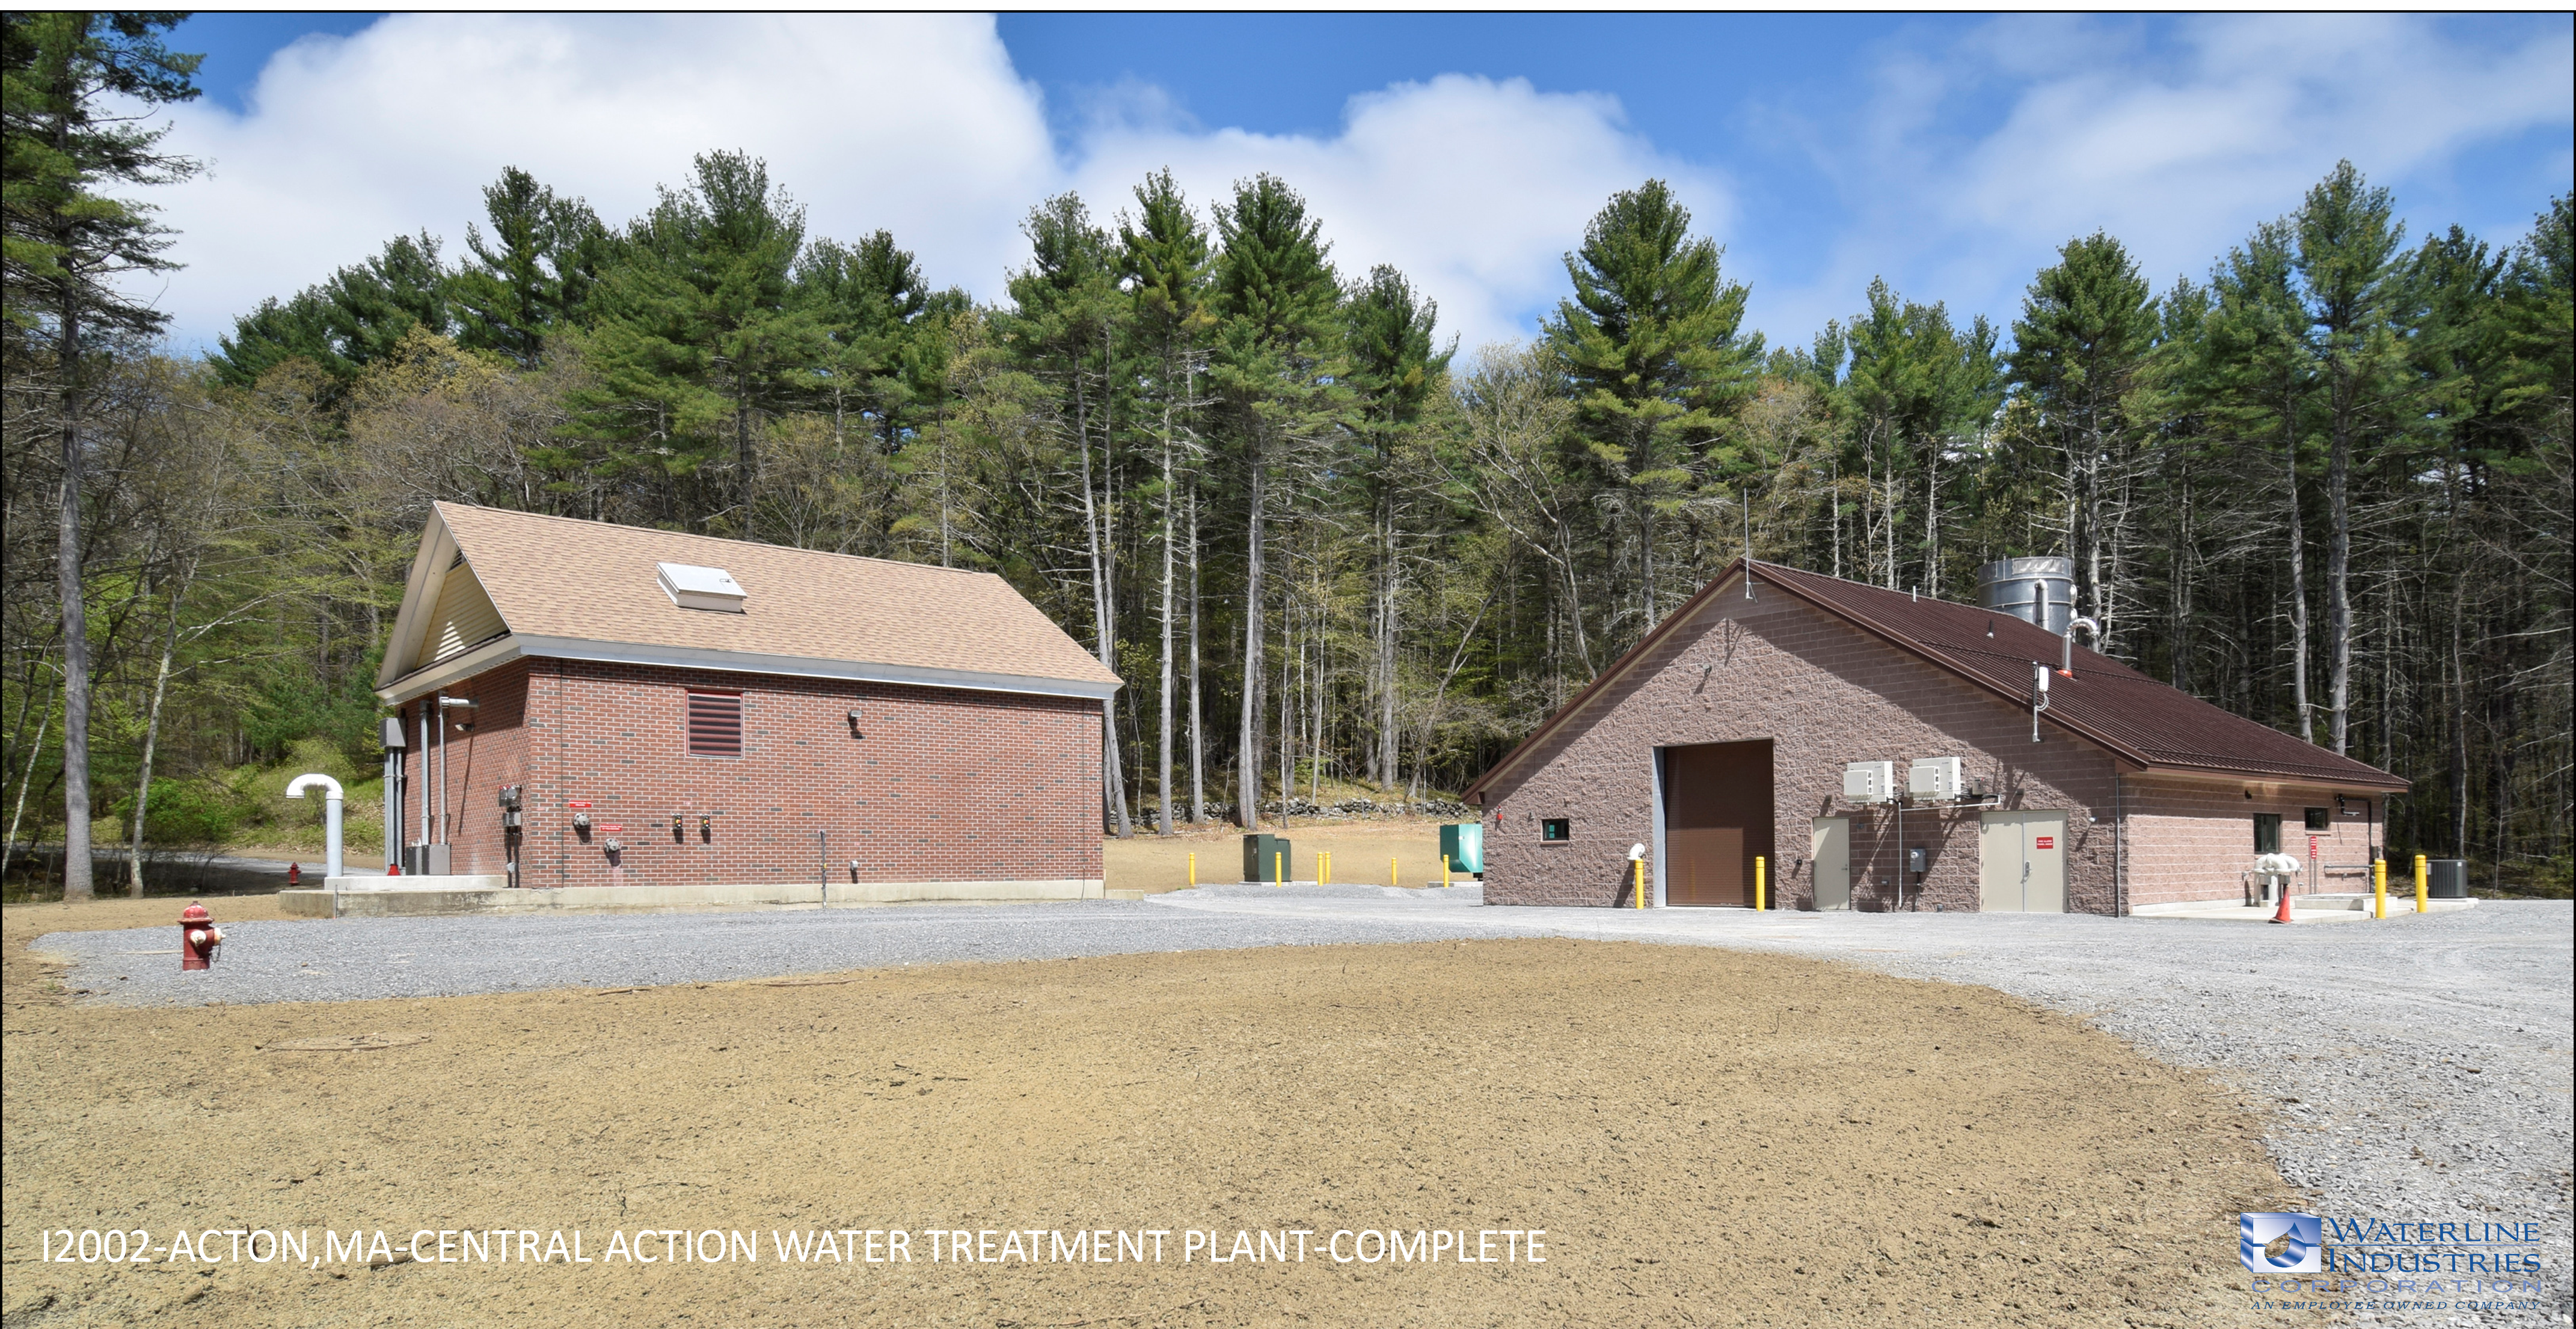 I2002-ACTON,MA-CENTRAL-ACTION-WATER-TREATMENT-PLANT-COMPLET